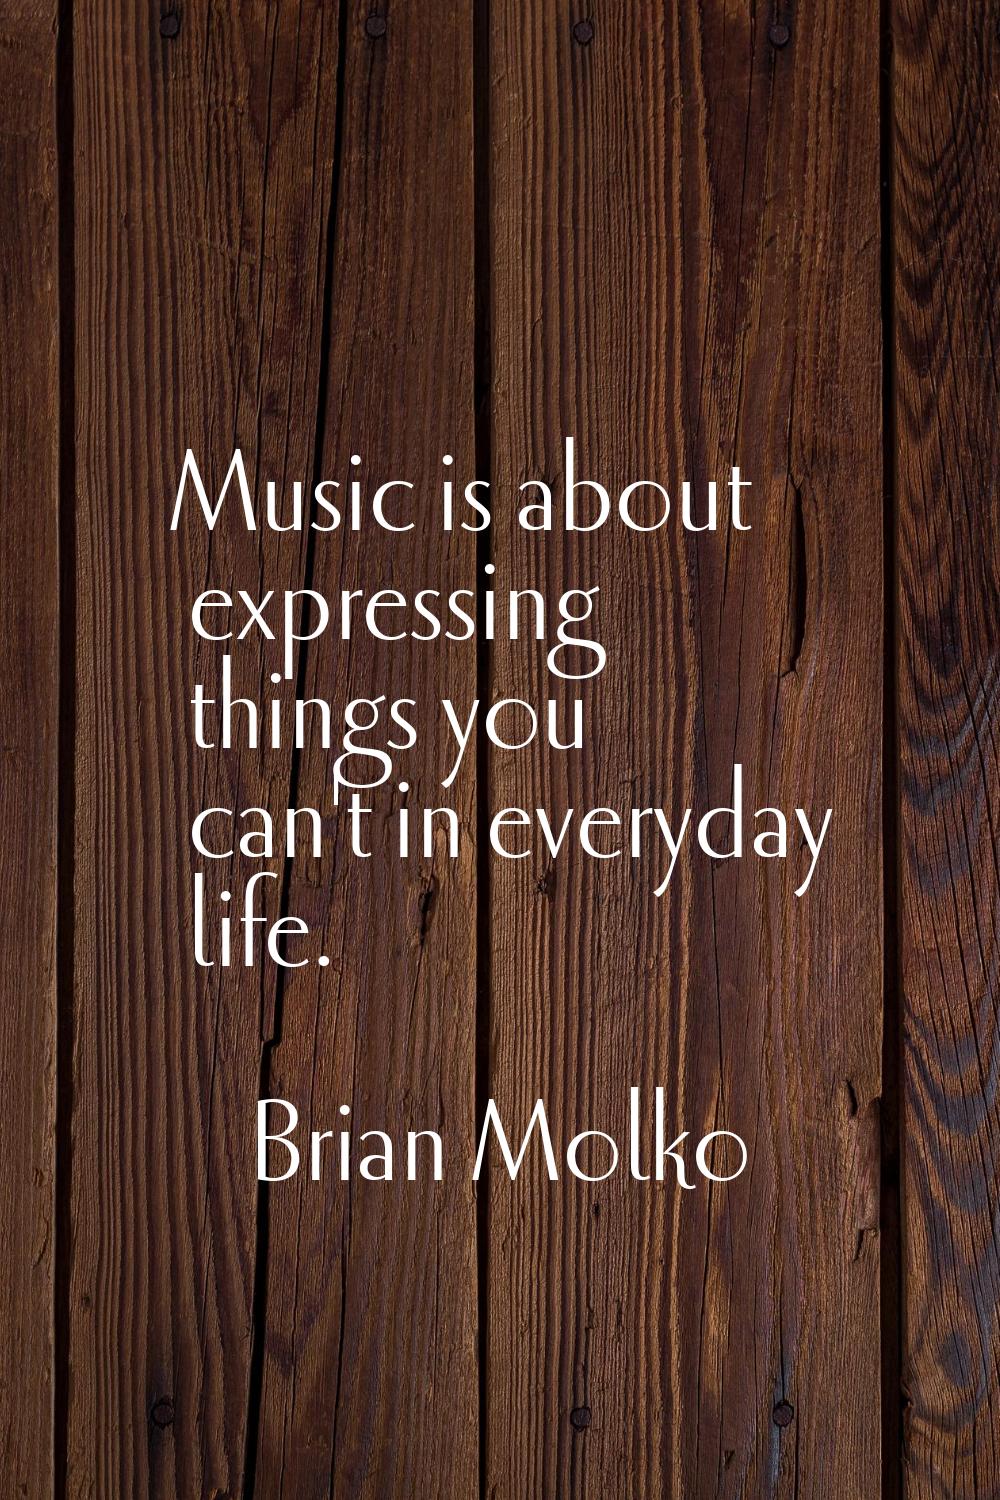 Music is about expressing things you can't in everyday life.